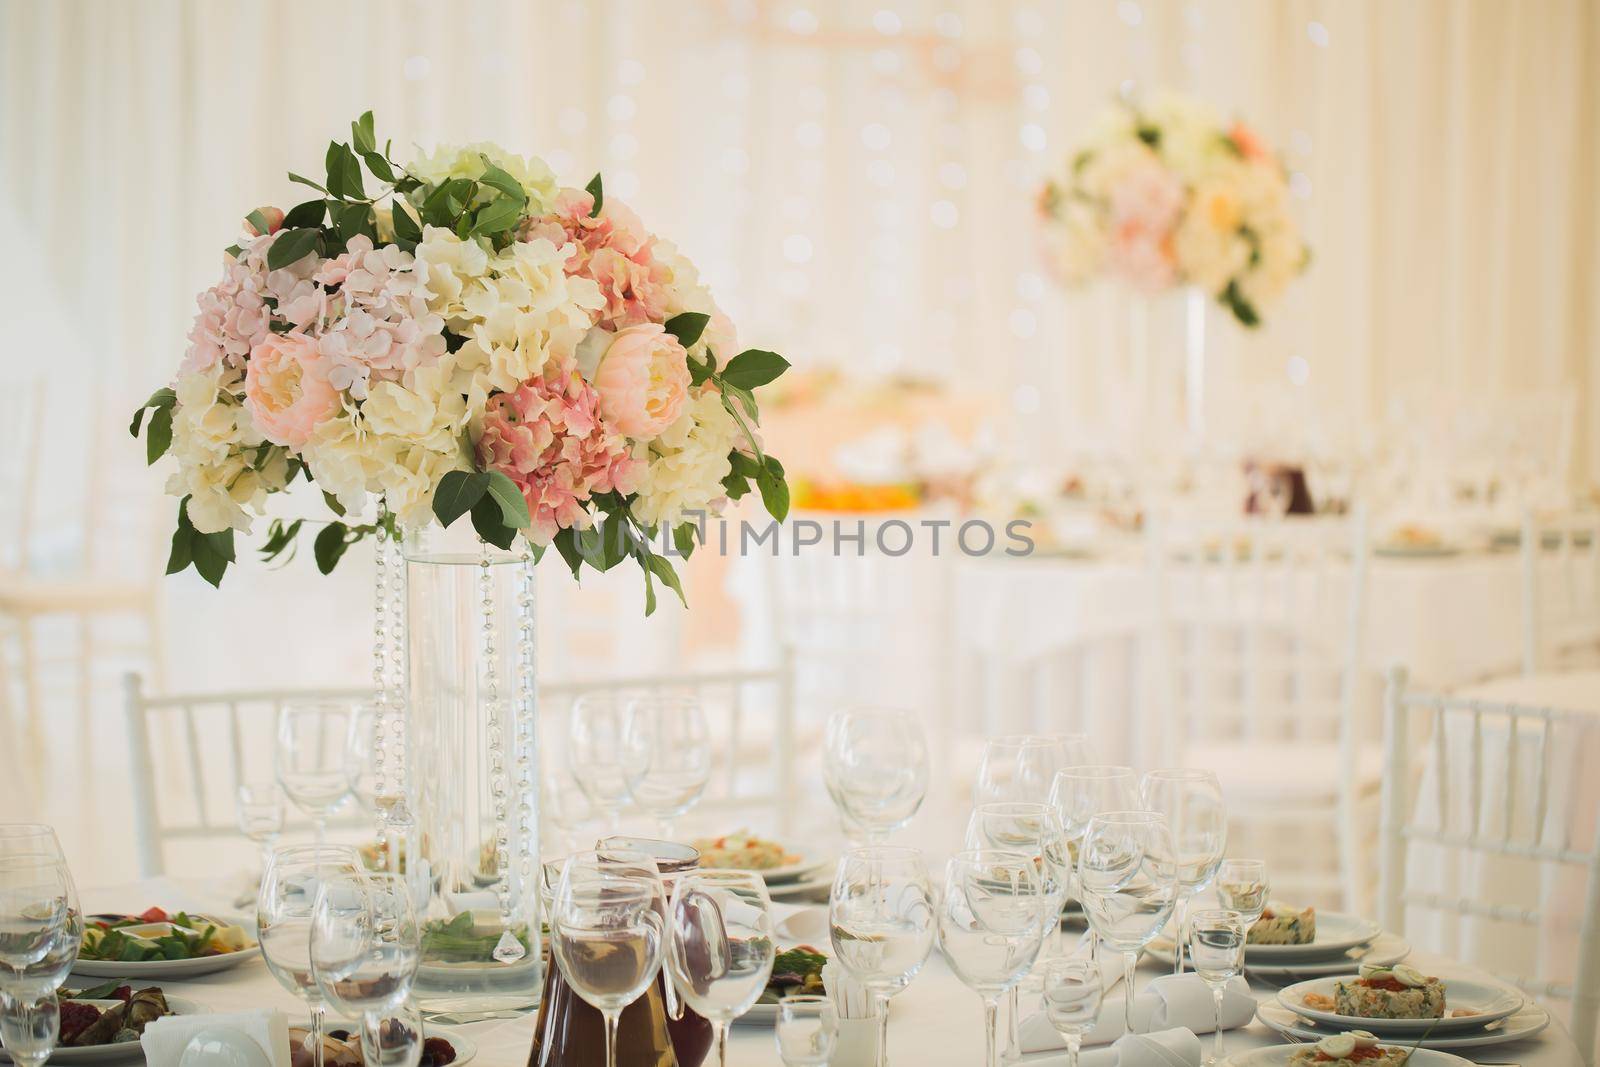 Vases with flowers on the wedding table by StudioPeace